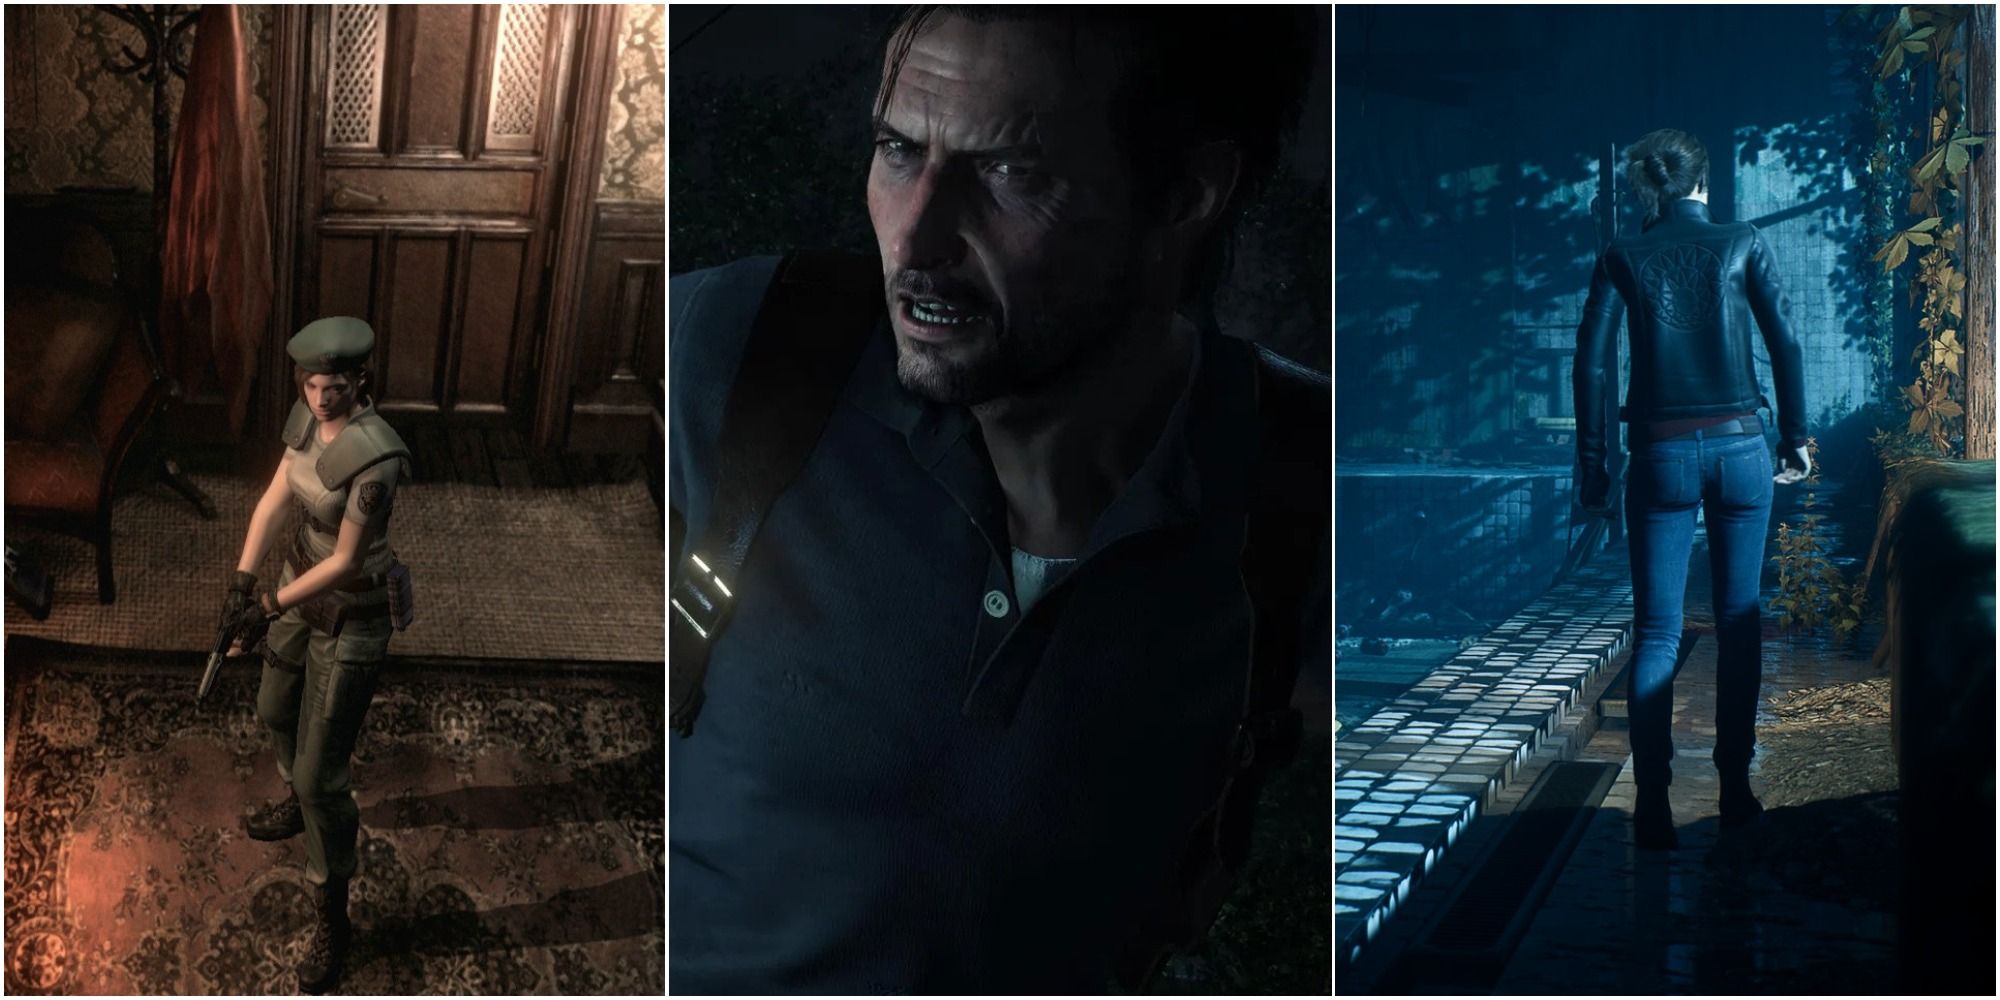 Split Image including Jill from Resident Evil, Sebastian from Evil Within 2, and Marianne from The Medium